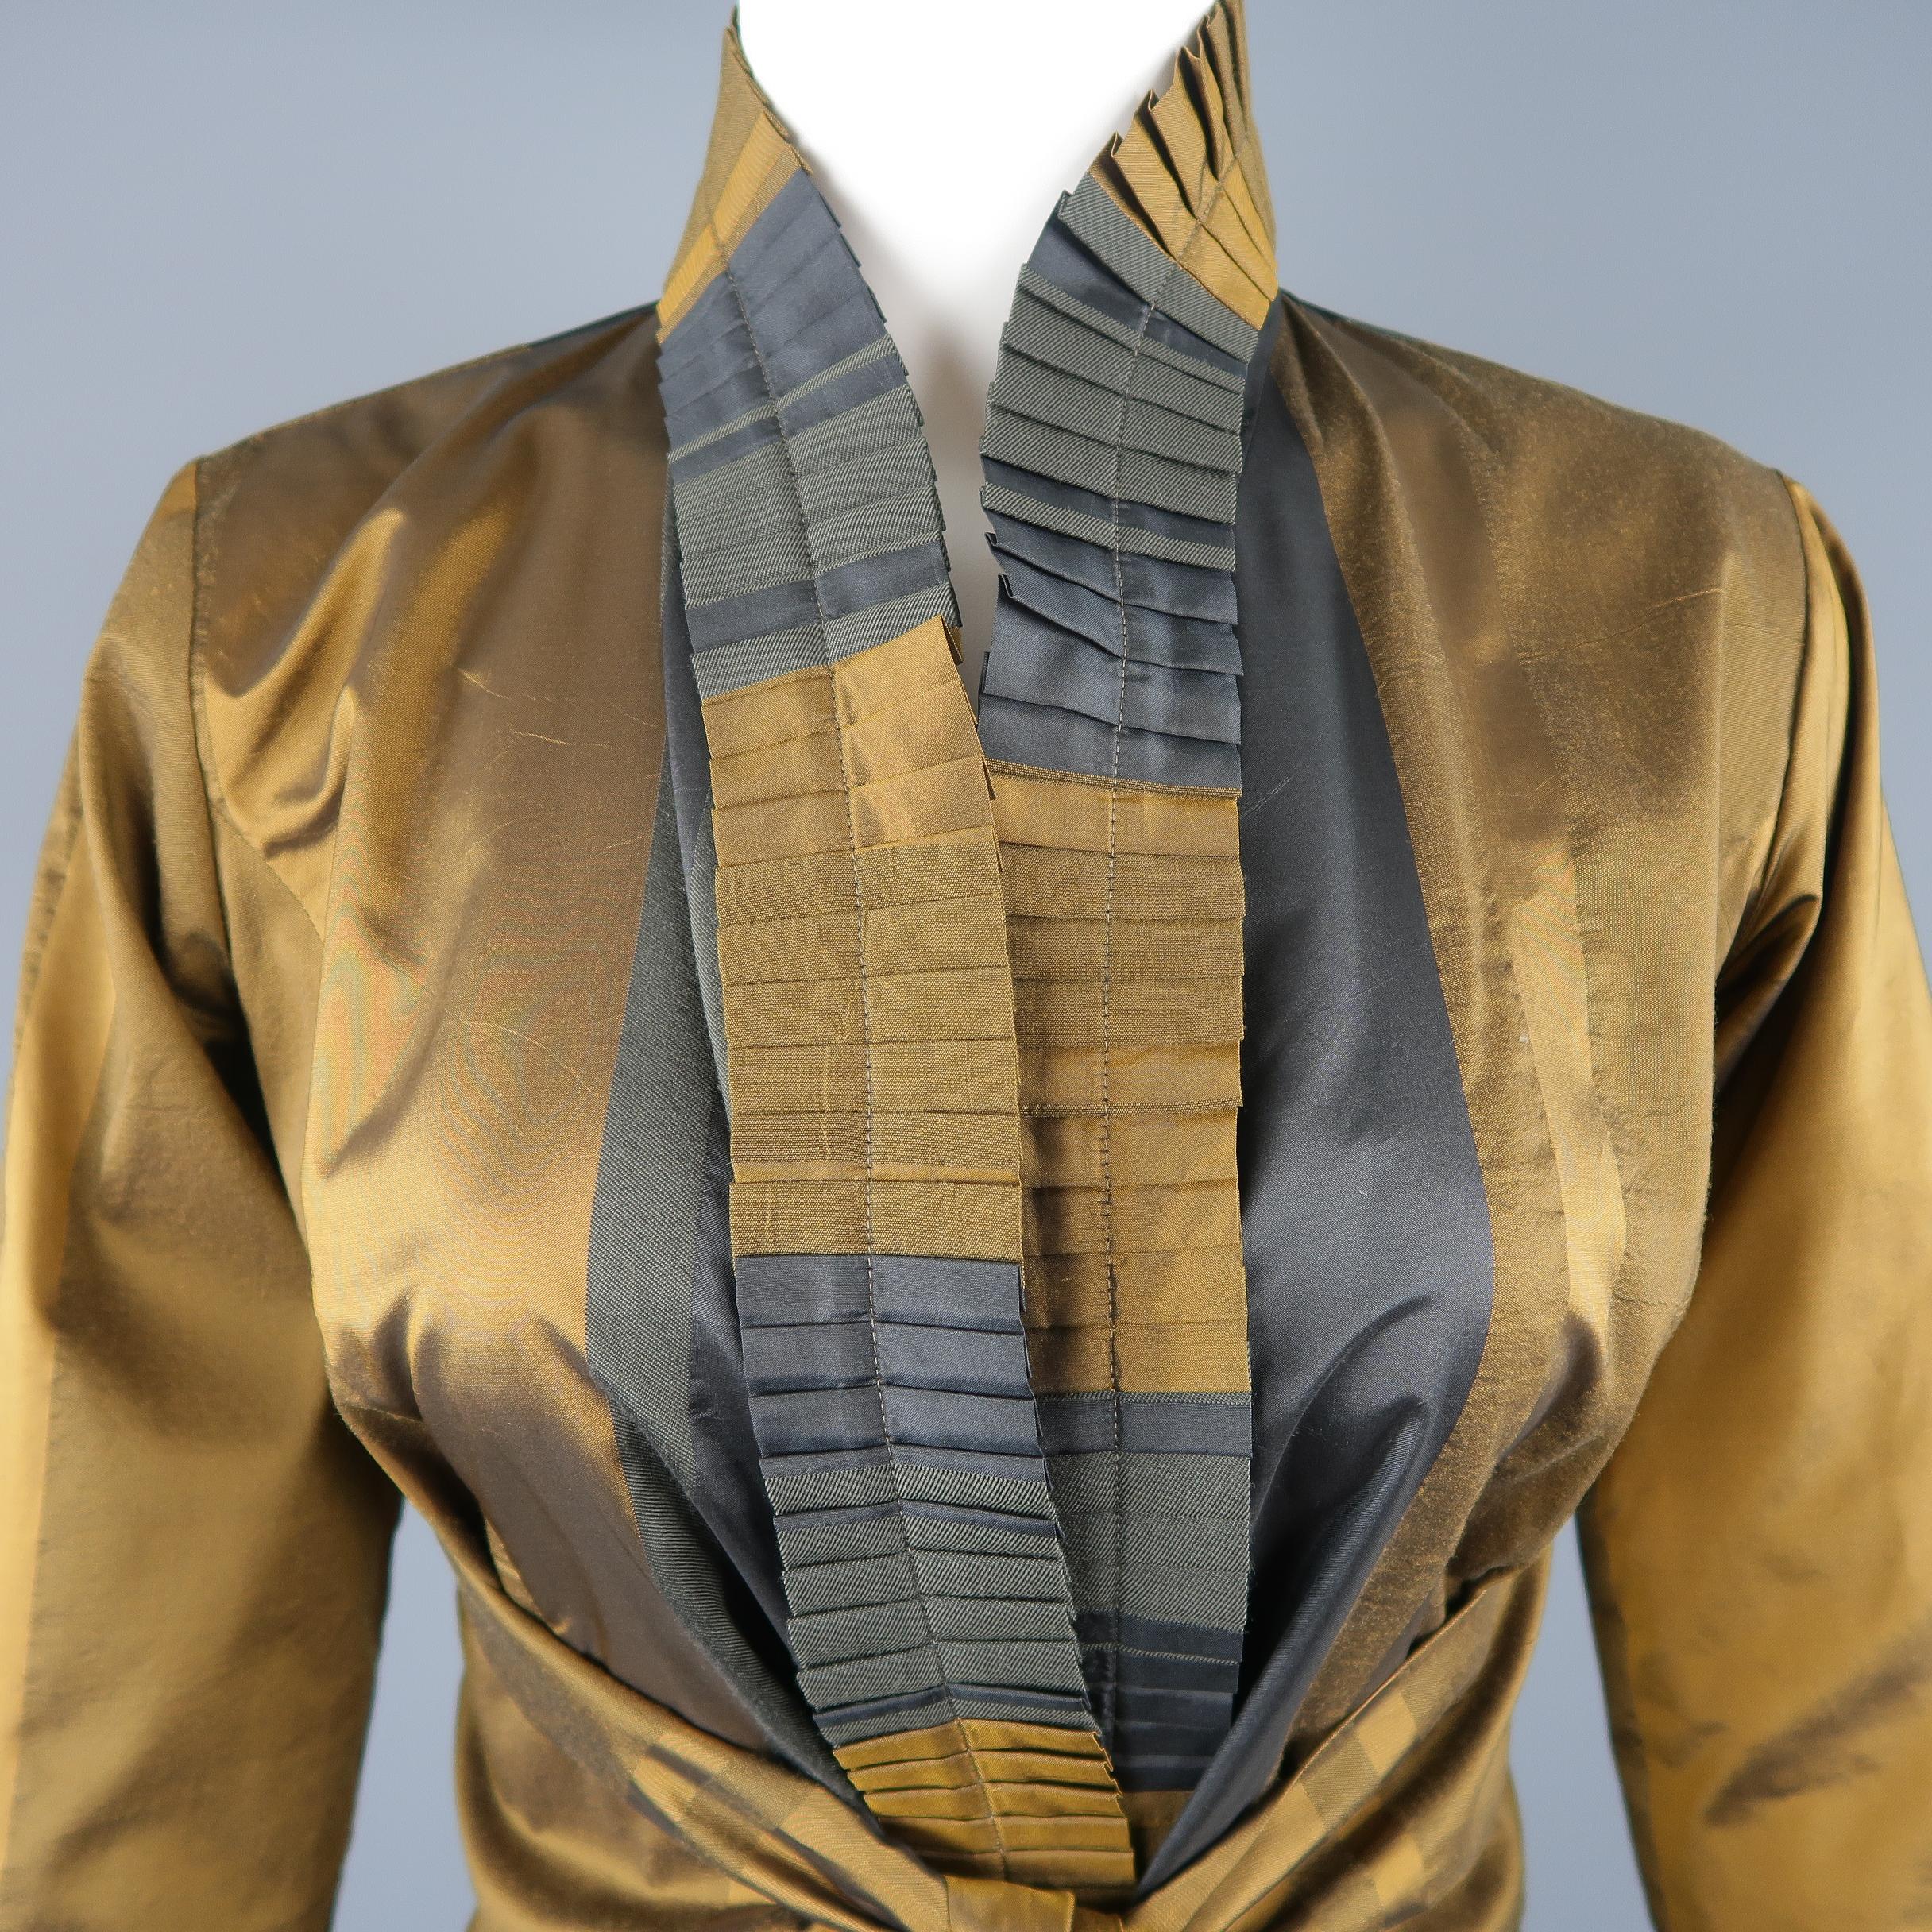 Etro jacket comes in a striped dark gold and teal taffeta/twill material with a pleated ruffle shawl collar and tied belt waist. Made in Italy.
 
Excellent Pre-Owned Condition.
Marked: IT 42
 
Measurements:
 
Shoulder: 15 in.
Bust: 34 in.
Sleeve: 24